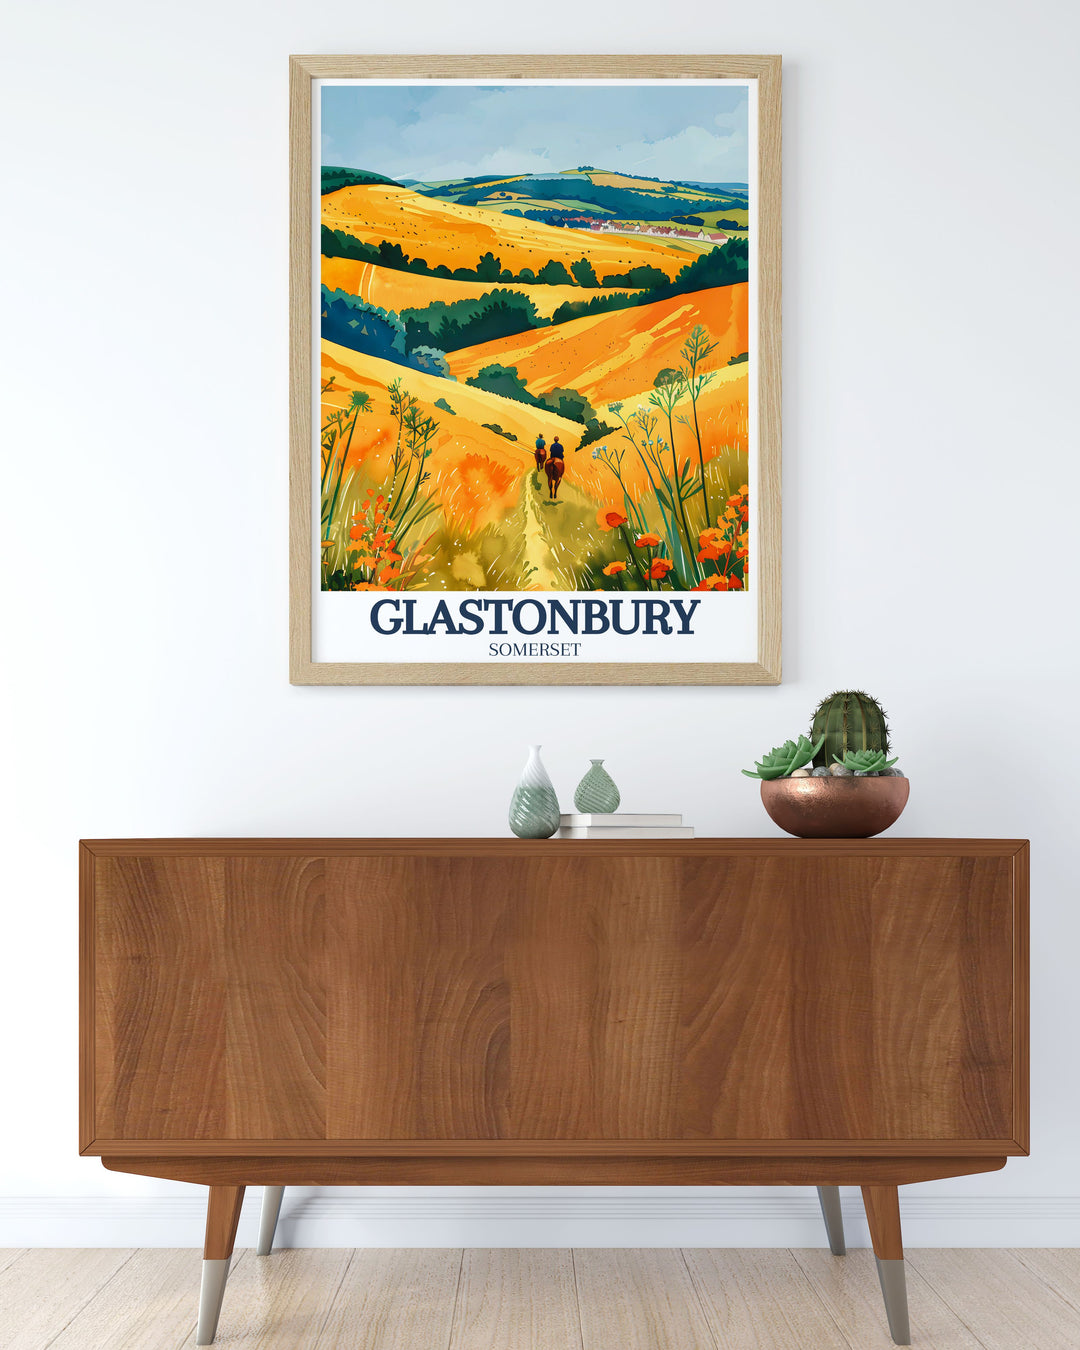 Beautiful Glastonbury Tor artwork capturing the essence of Somerset levels and Mendip hills a great piece for UK wall art collectors and those looking for unique Glastonbury Tor gifts or England travel art to enhance their living space.